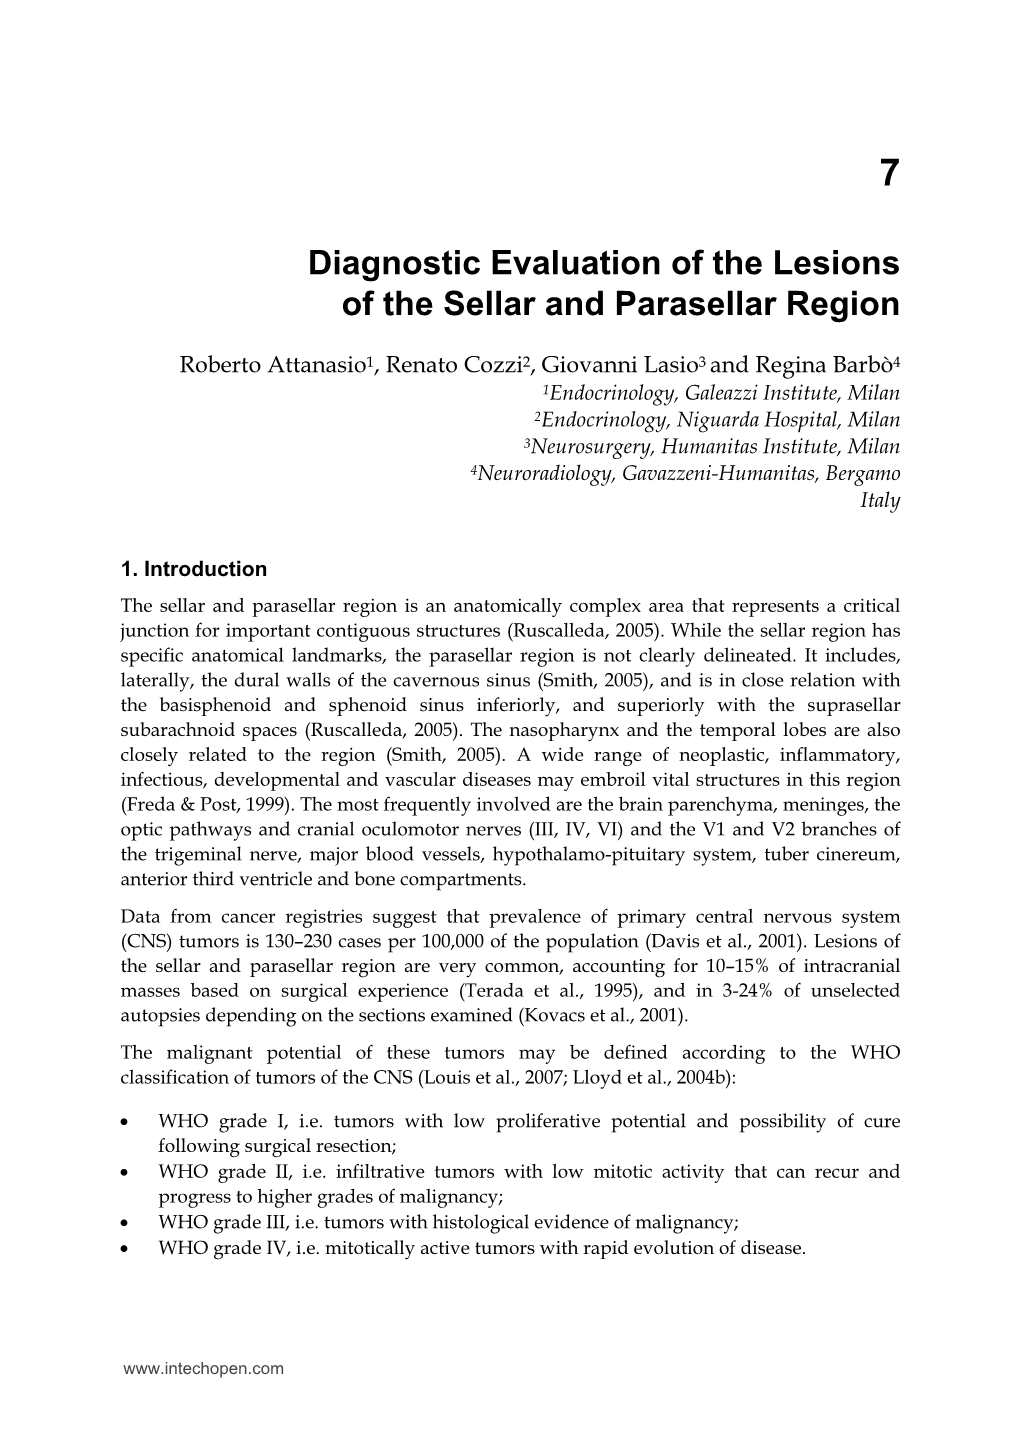 Diagnostic Evaluation of the Lesions of the Sellar and Parasellar Region